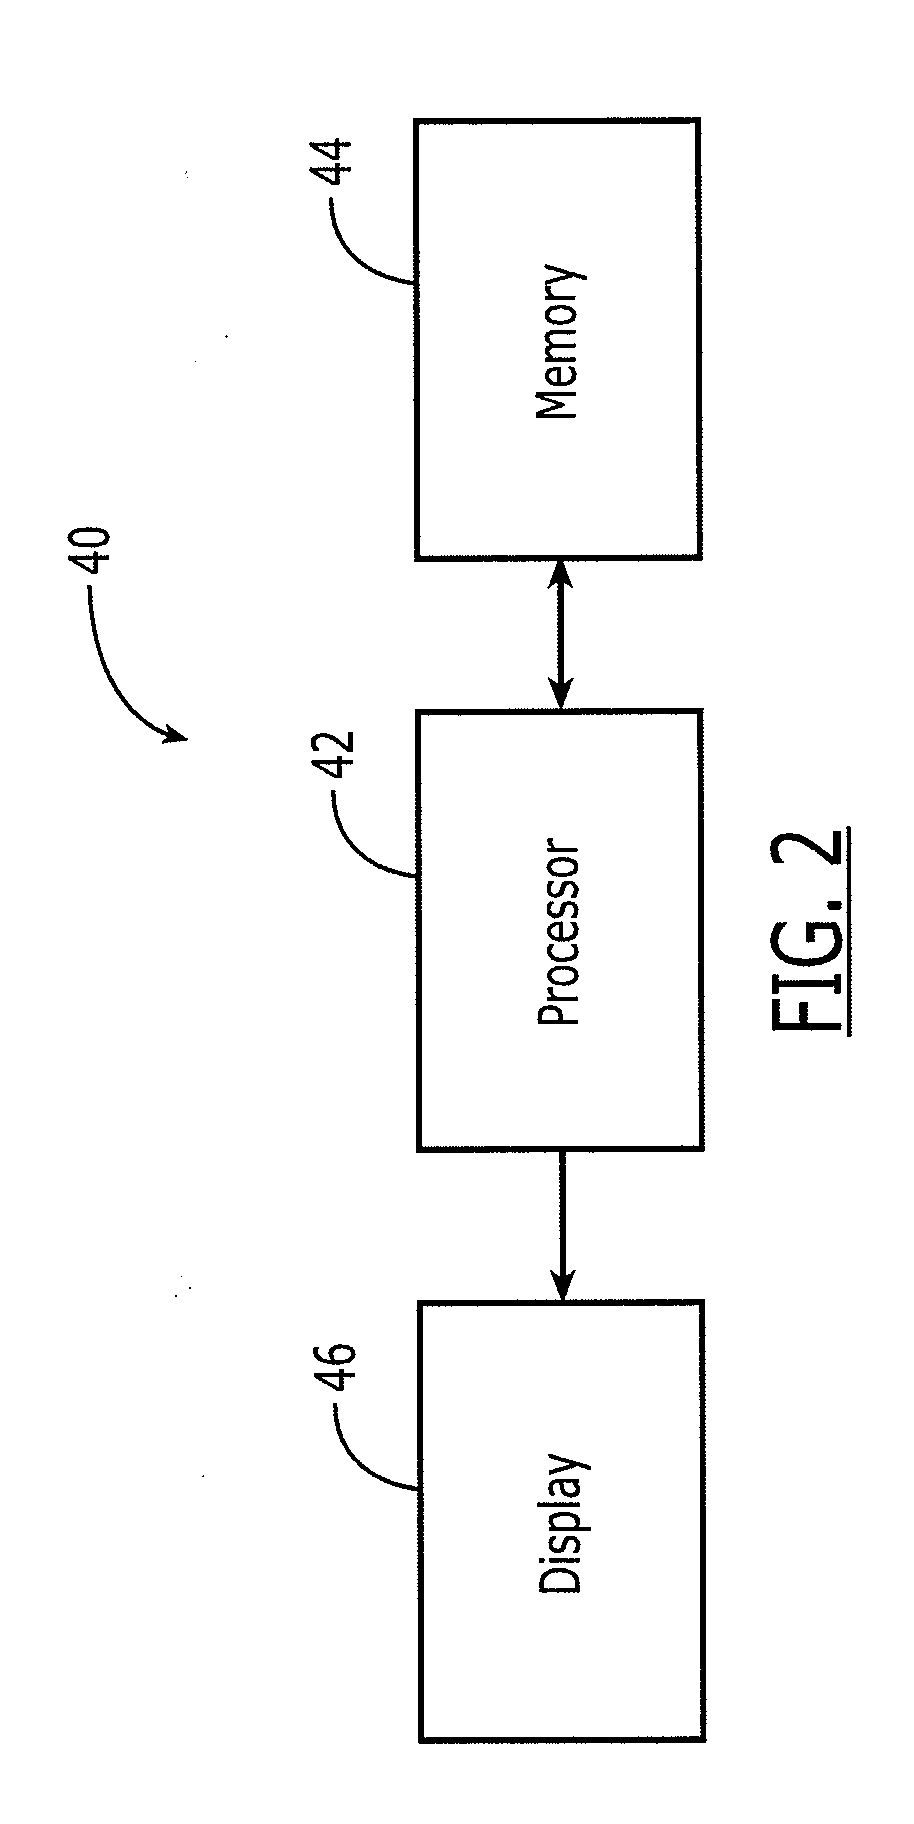 Method, Apparatus And Computer Program Product For Predicting And Avoiding A Fault